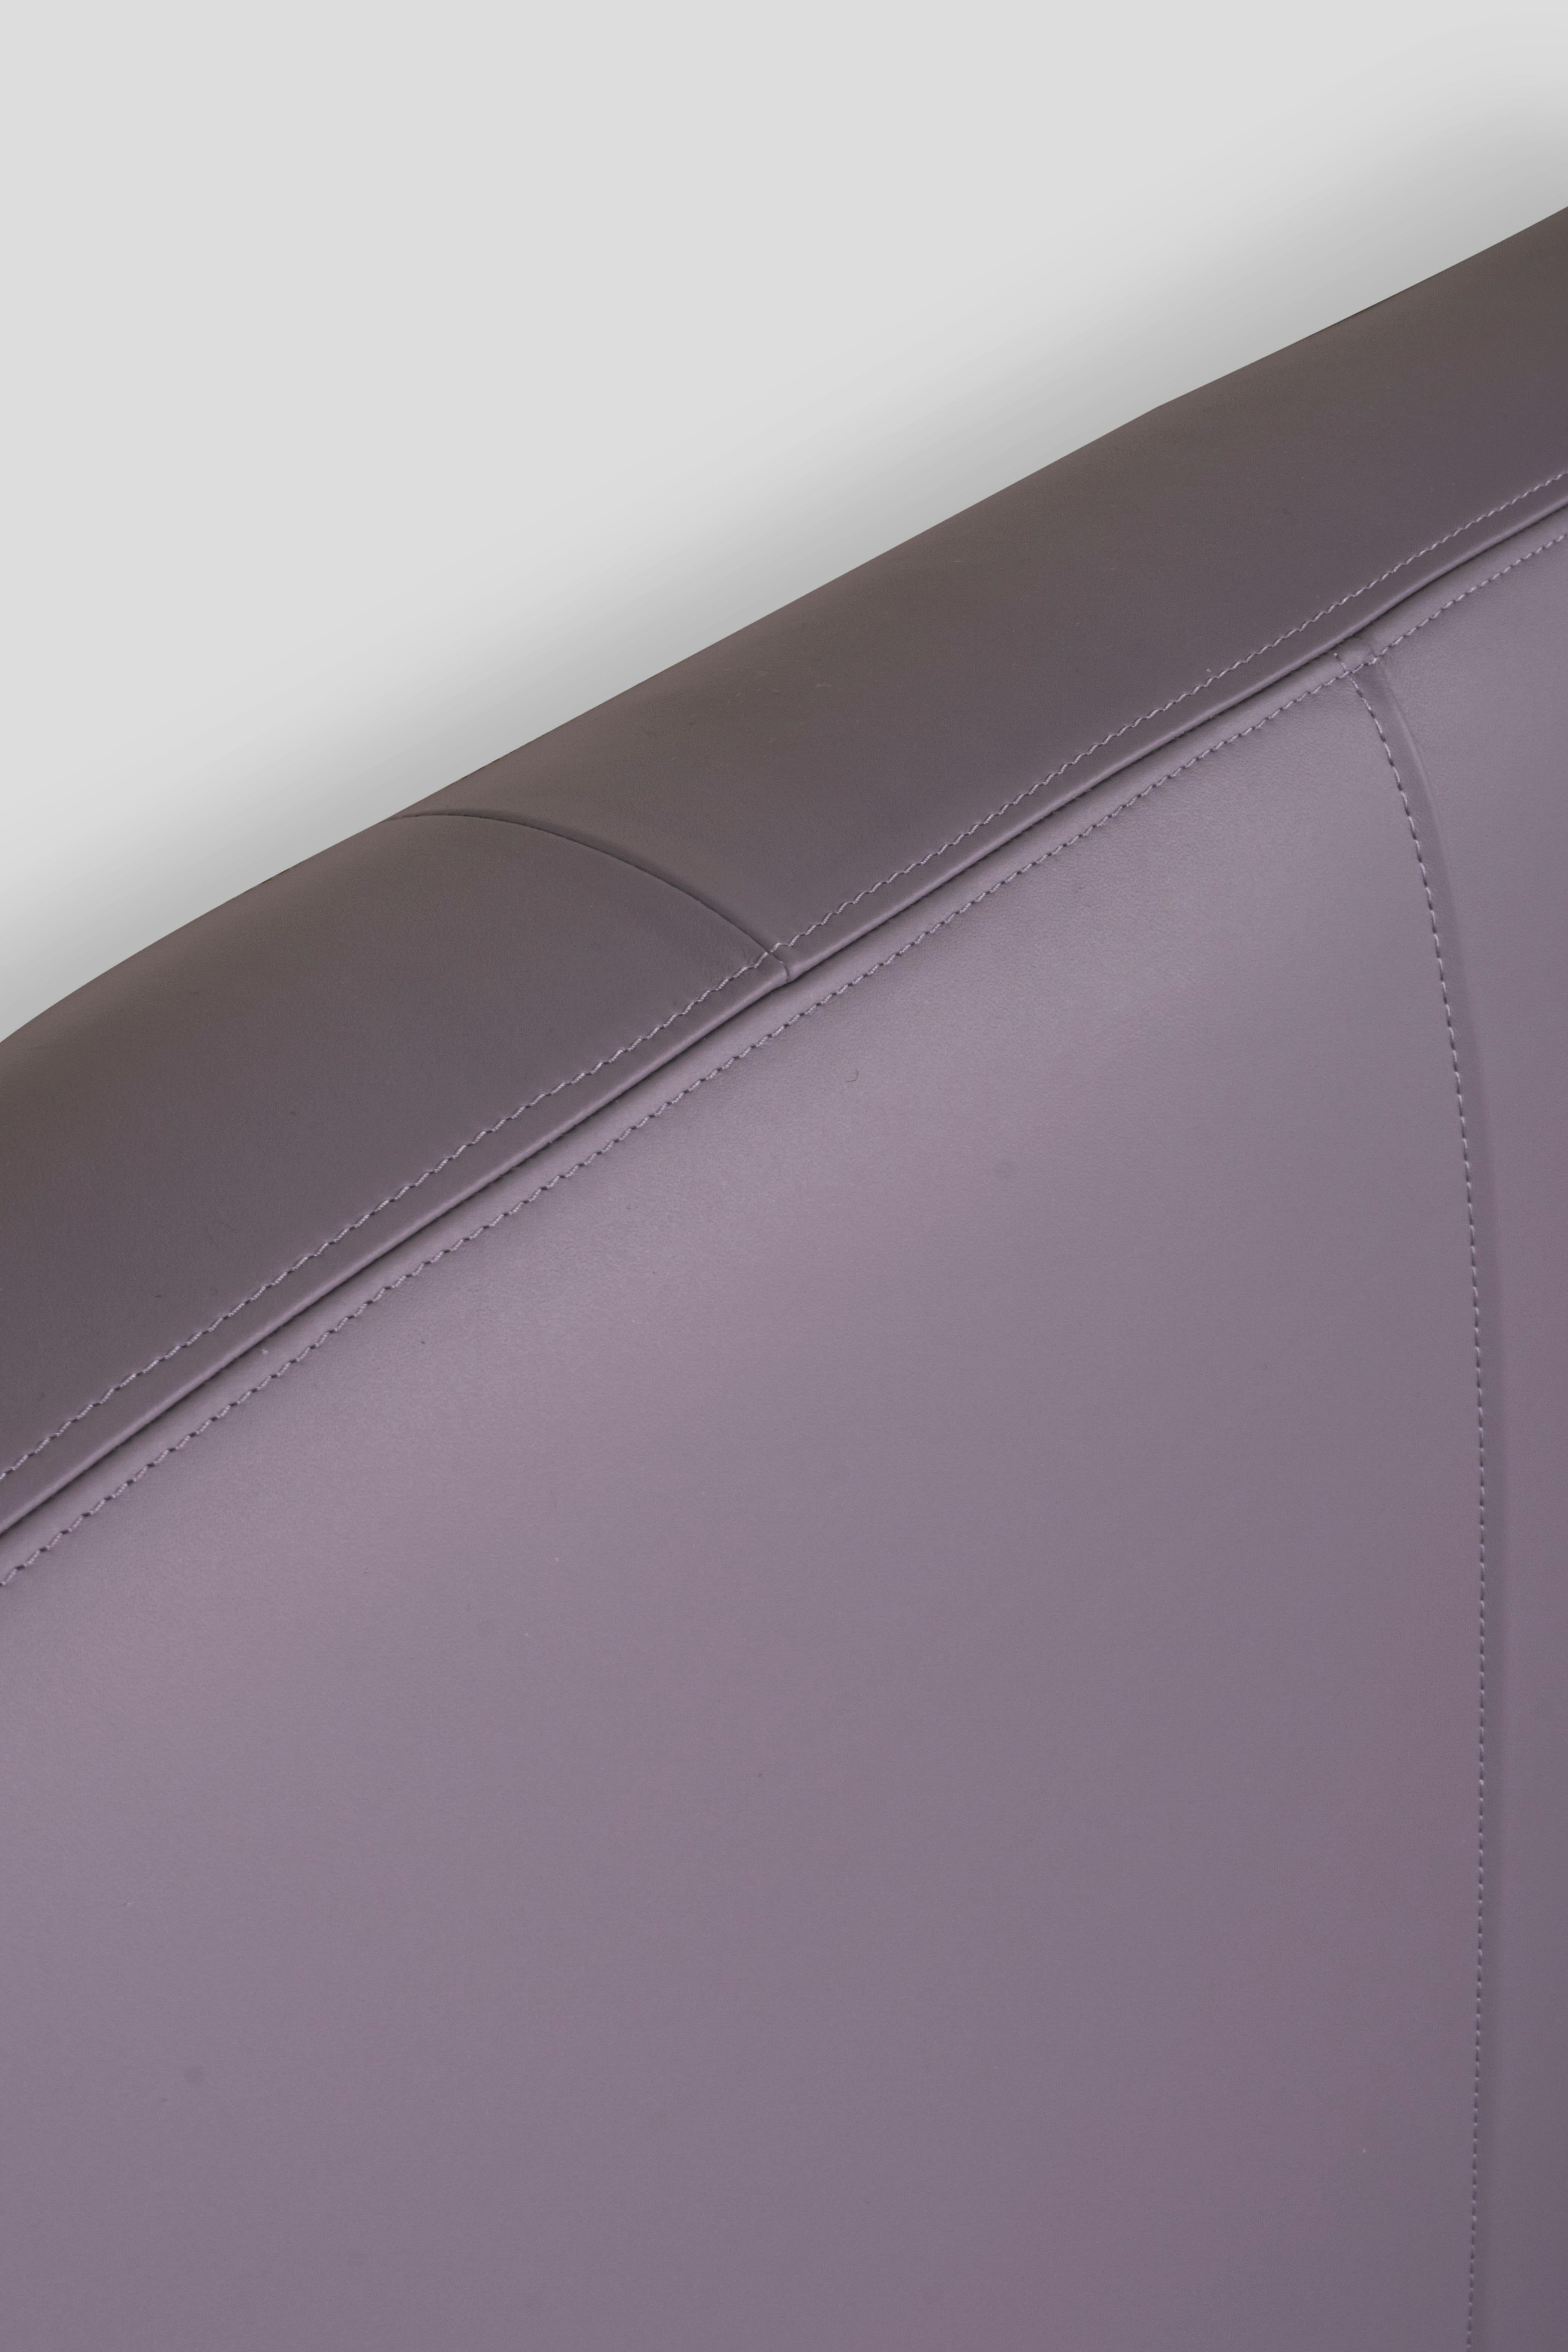 The Moderns Free Hand US King Size Bed Purple Leather Handmade in Portugal Greenapple Neuf - En vente à Lisboa, PT